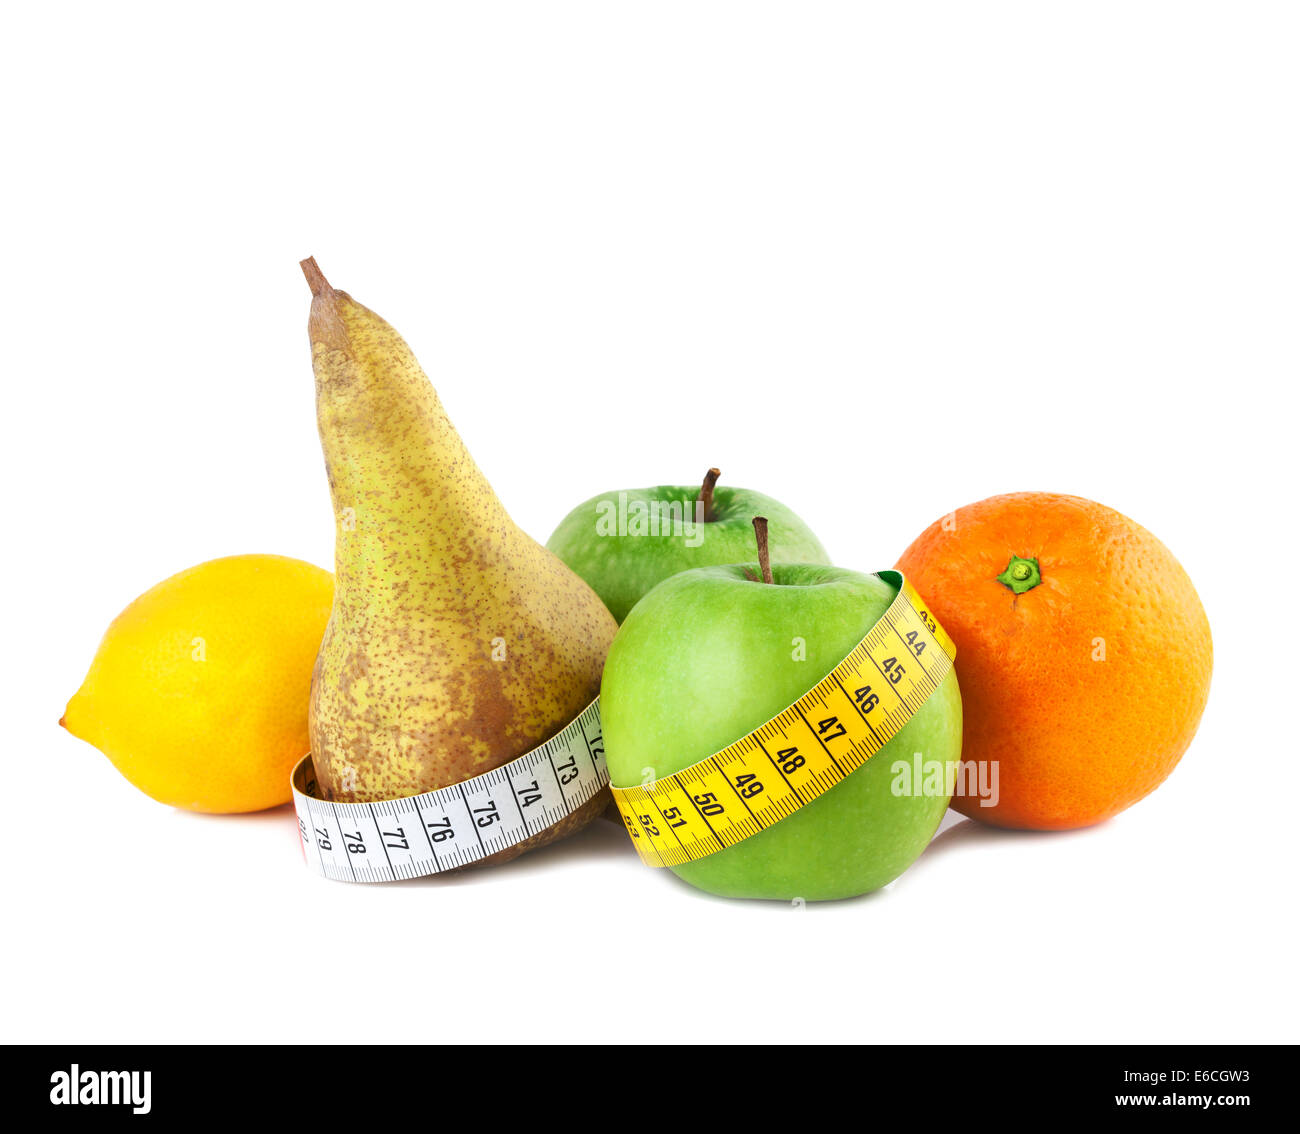 Healthy Food Weight loss Stock Photo